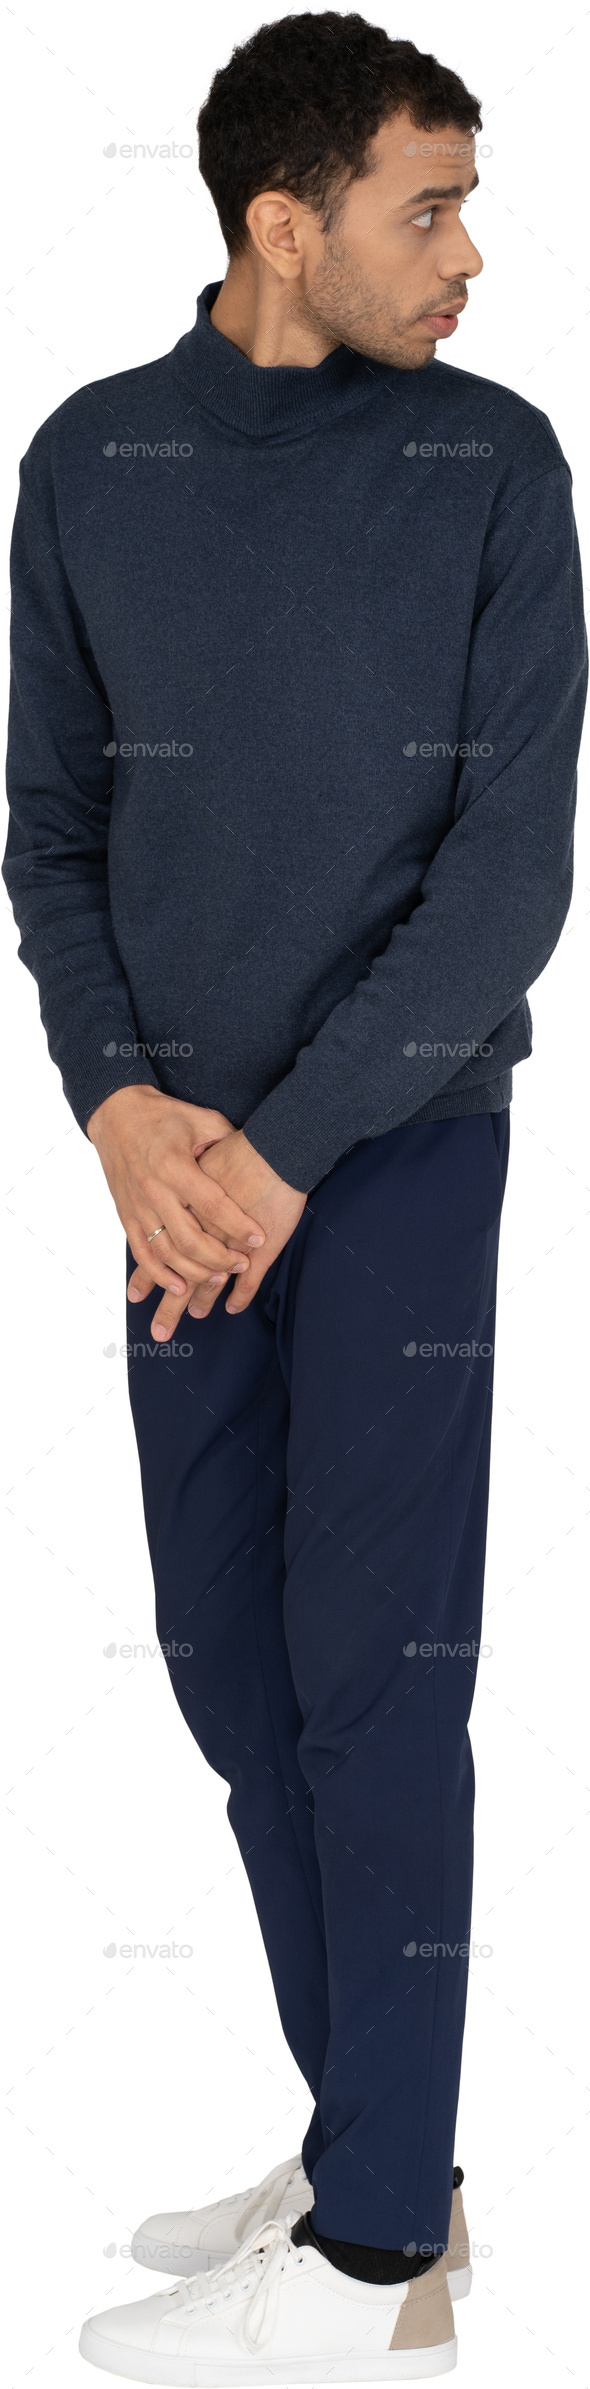 a man wearing a navy blue sweatshirt and blue pants with his hands on his